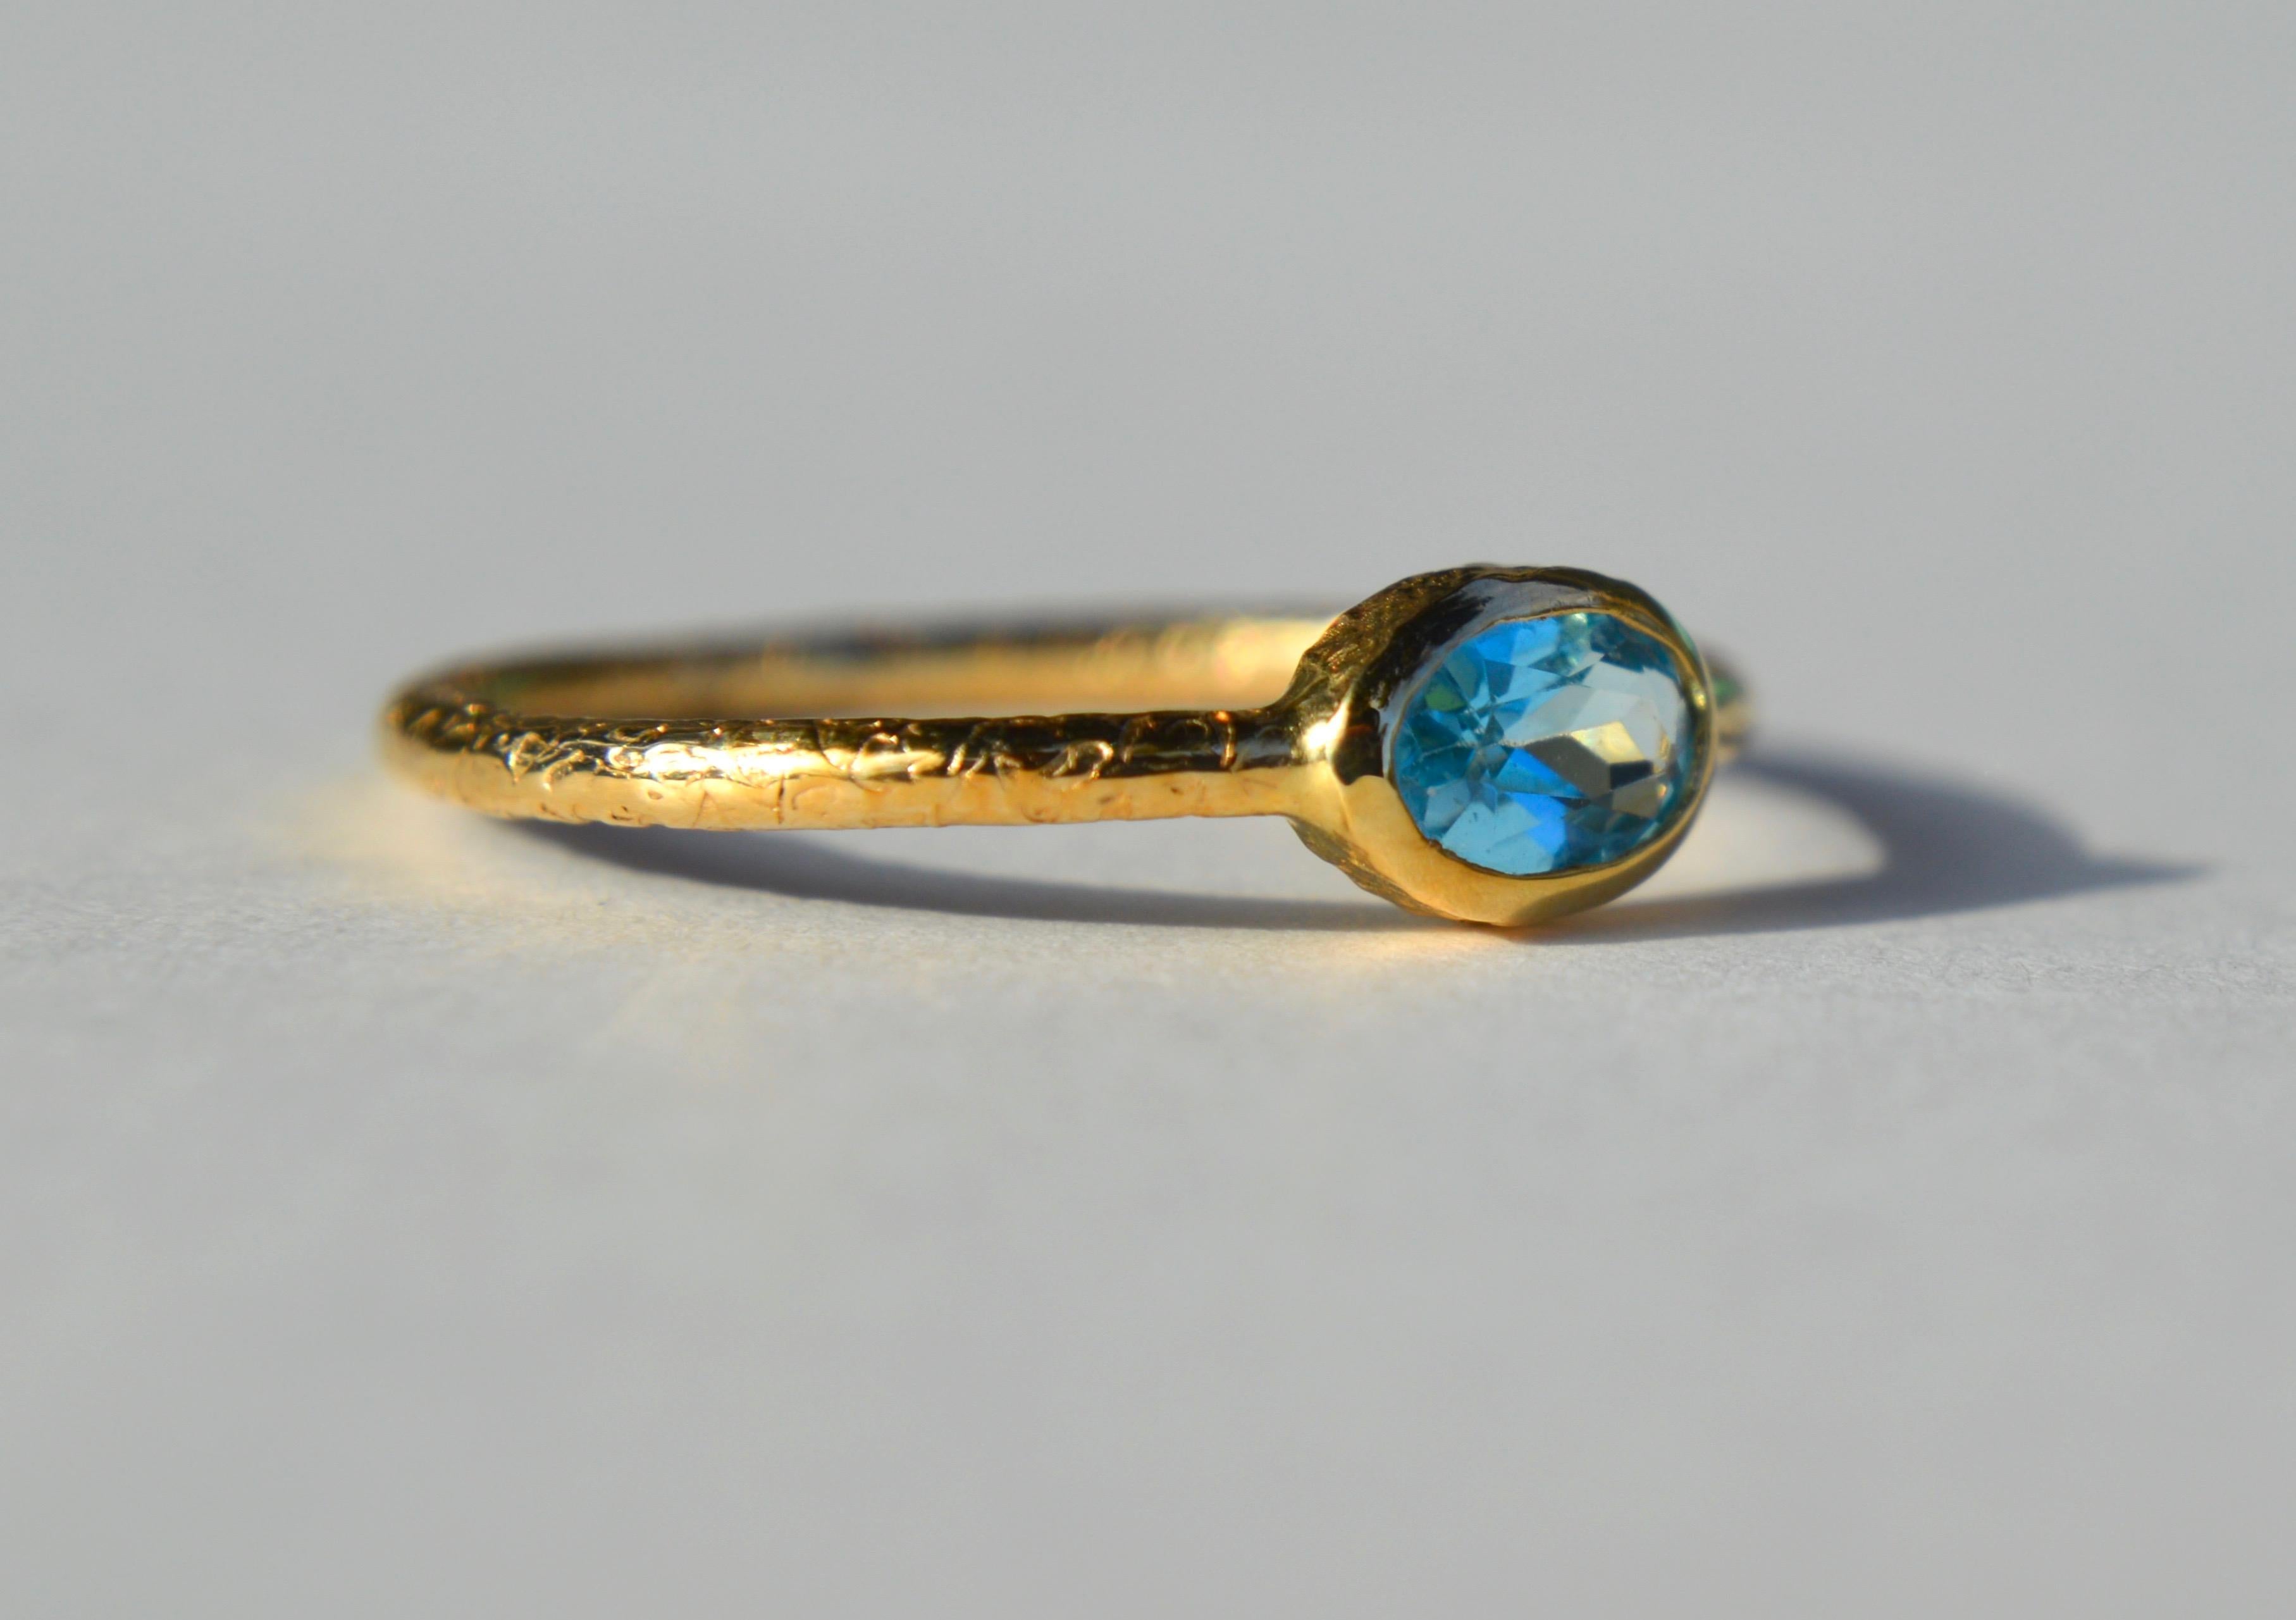 Lovely vintage 1980s 14K yellow gold .70 carat bezel set natural aquamarine thin textured stacking or  alternative engagement ring. In very good condition. Size 8, can be resized by a jeweler. Marked as 14K gold. Made in Turkey.

Aquamarine is the